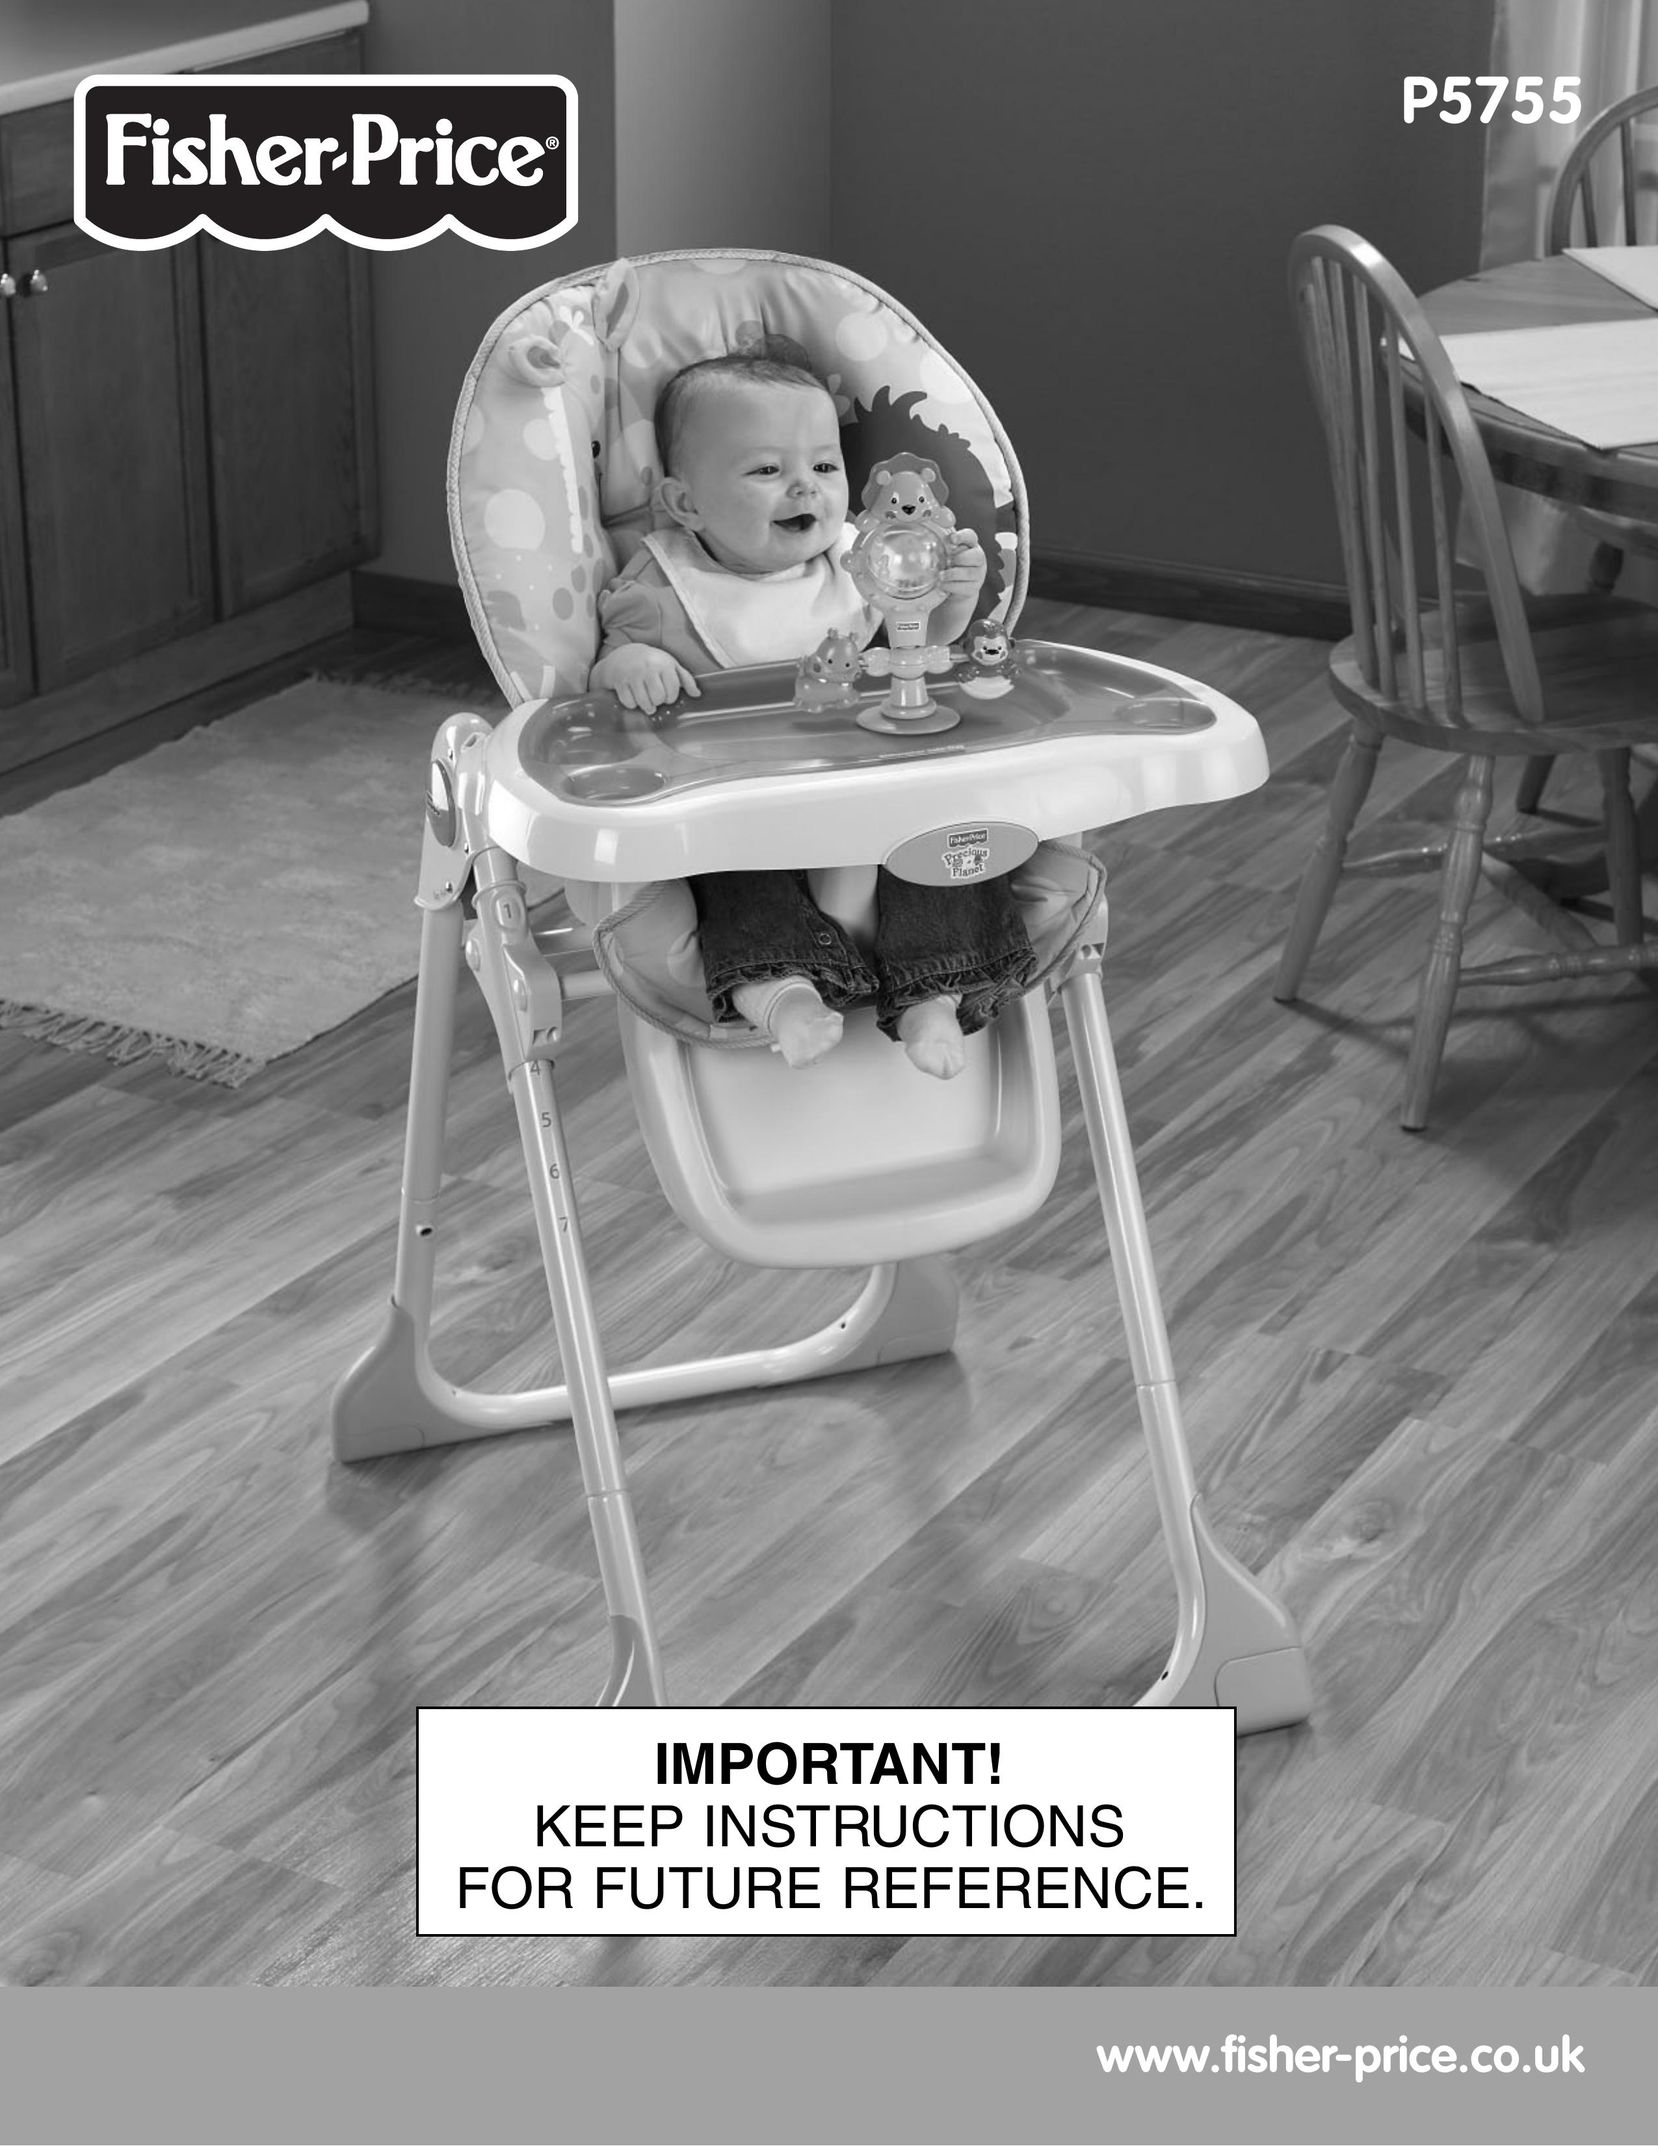 Fisher-Price P5755 High Chair User Manual